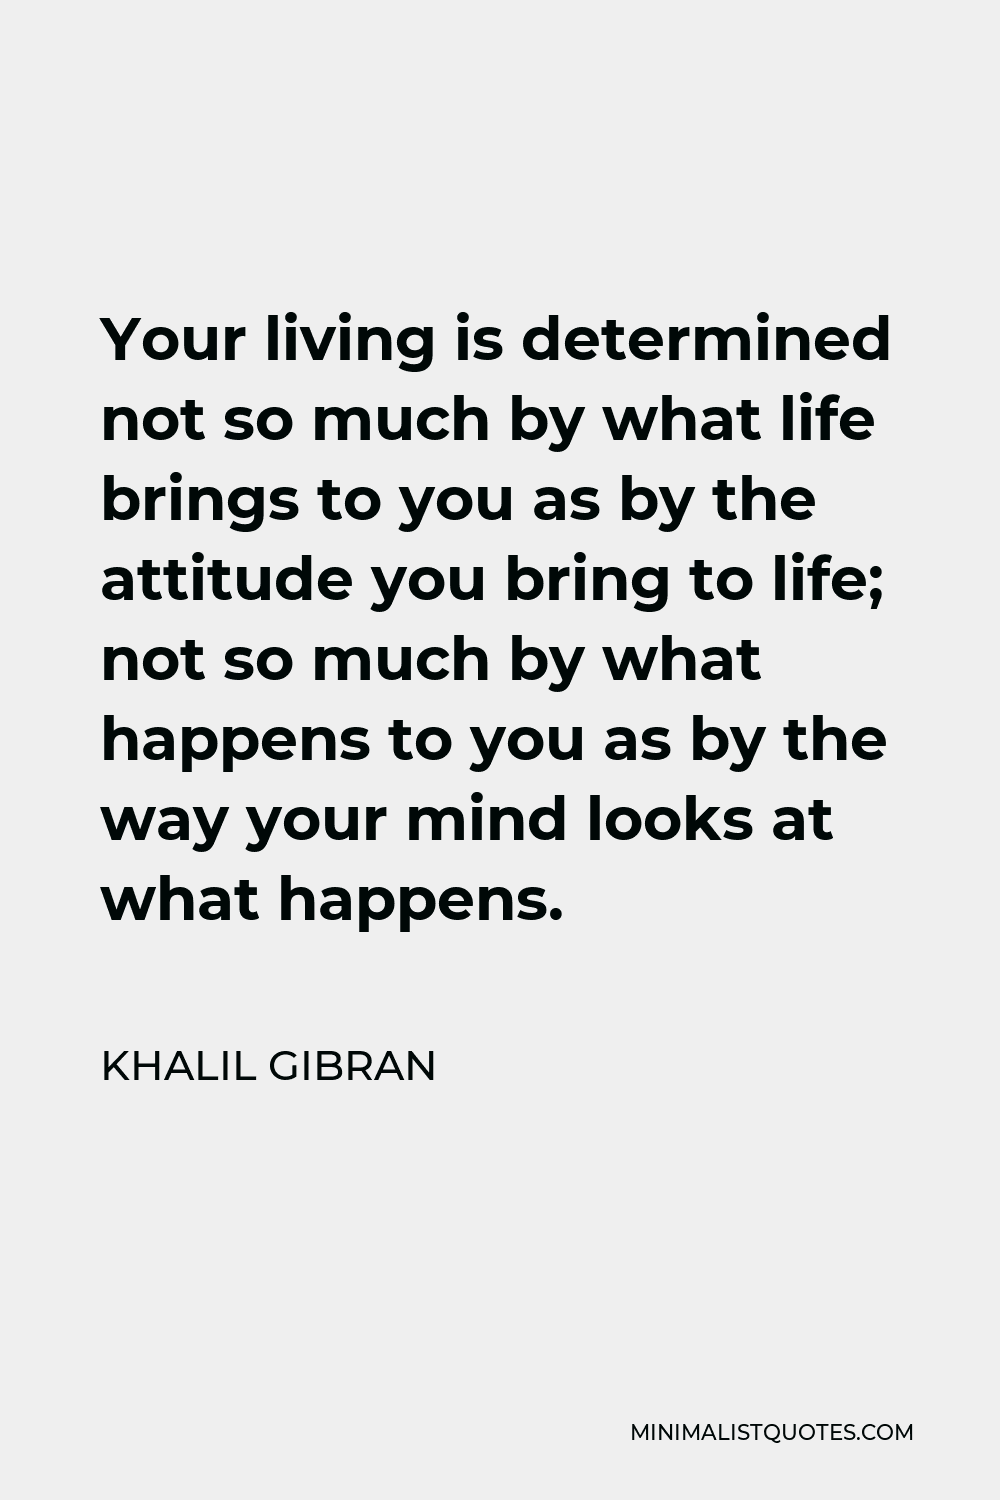 Khalil Gibran Quote - Your living is determined not so much by what life brings to you as by the attitude you bring to life; not so much by what happens to you as by the way your mind looks at what happens.